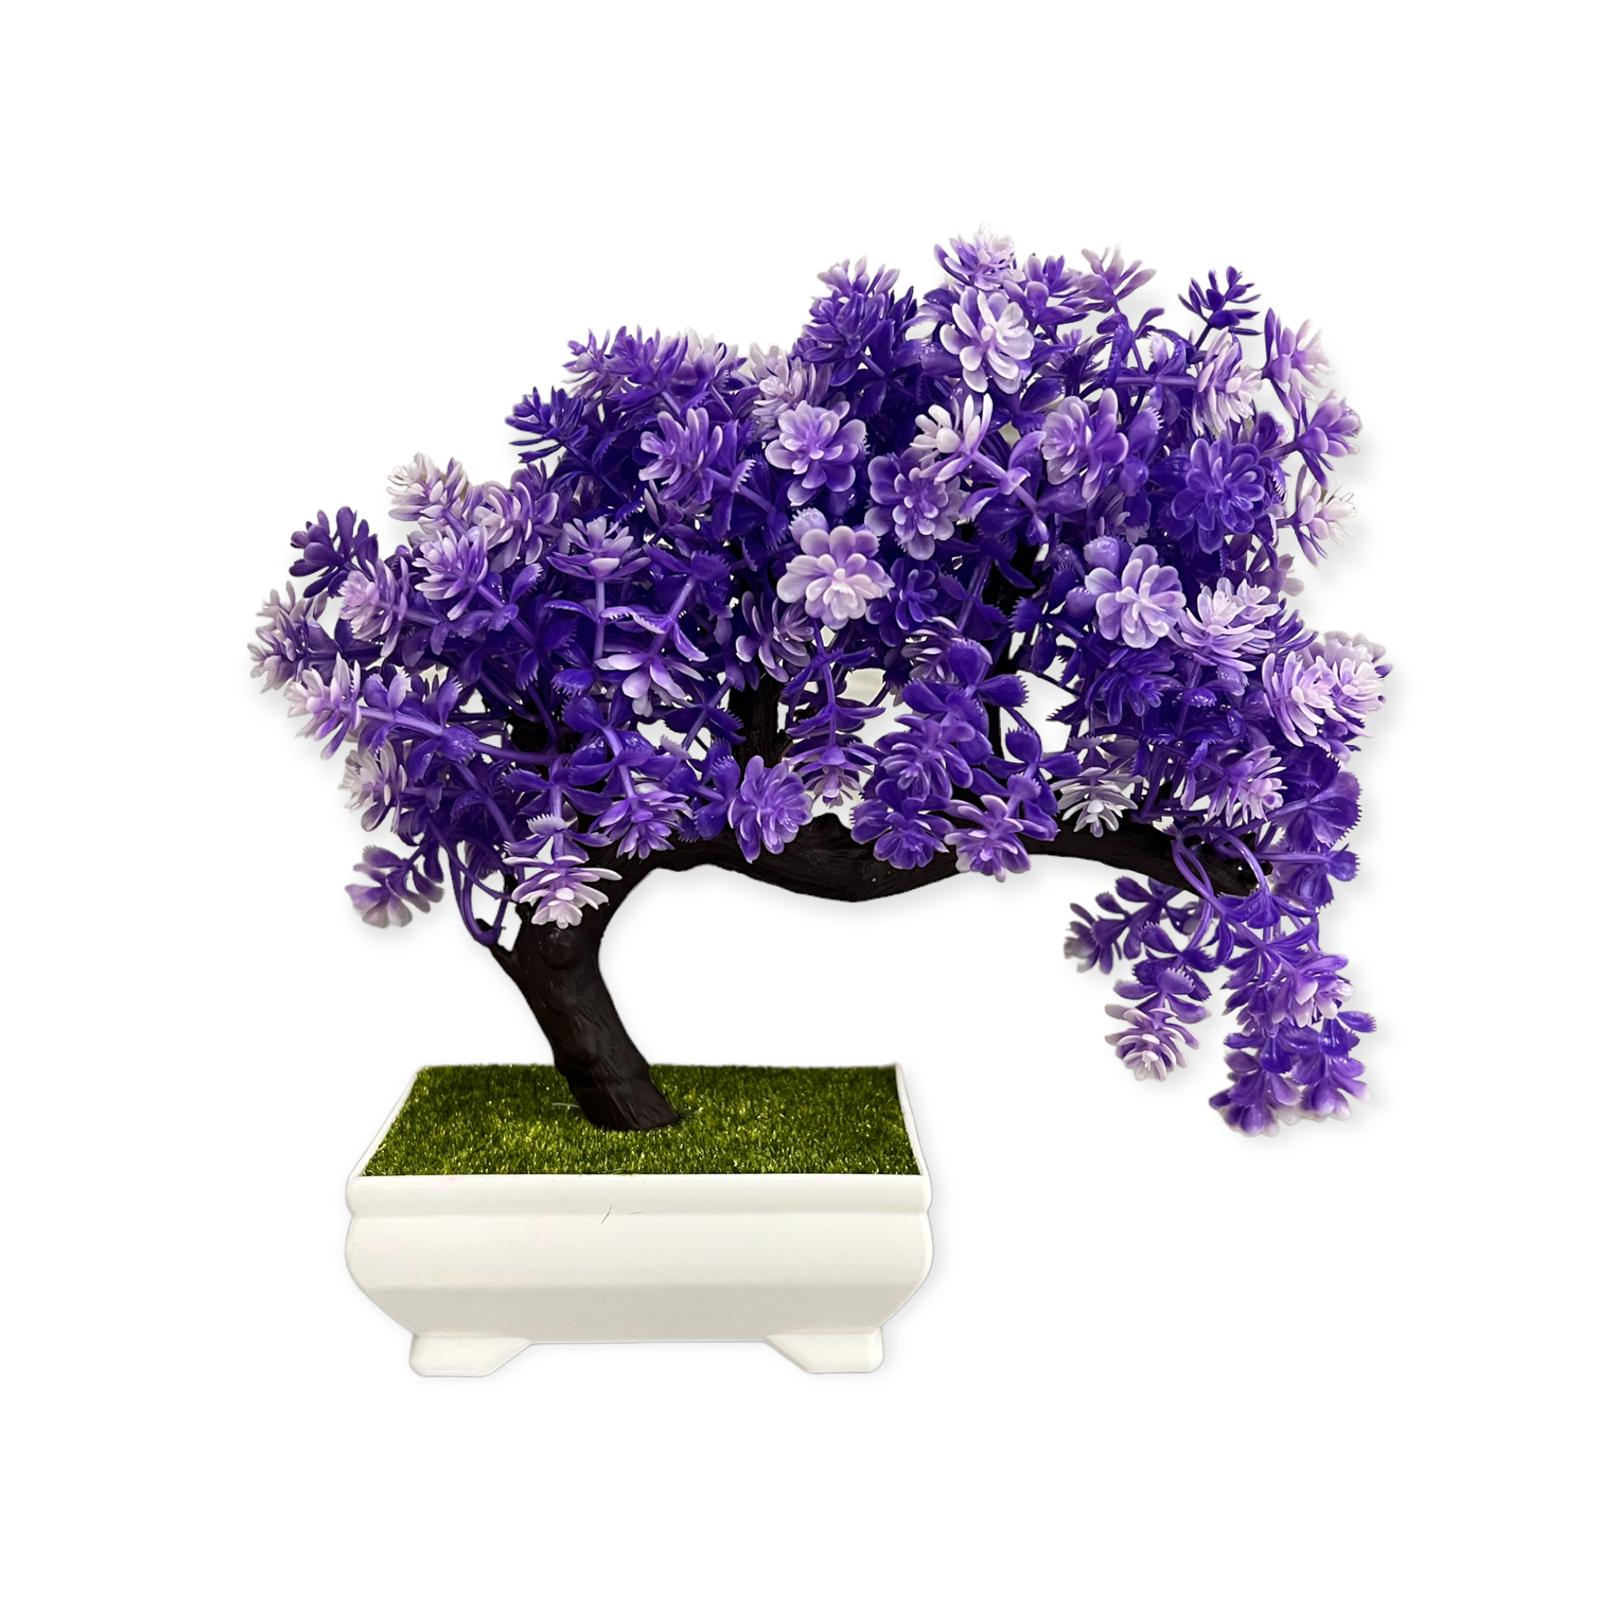 Artificial : Sideways Bonsai in Different Colored Leaves